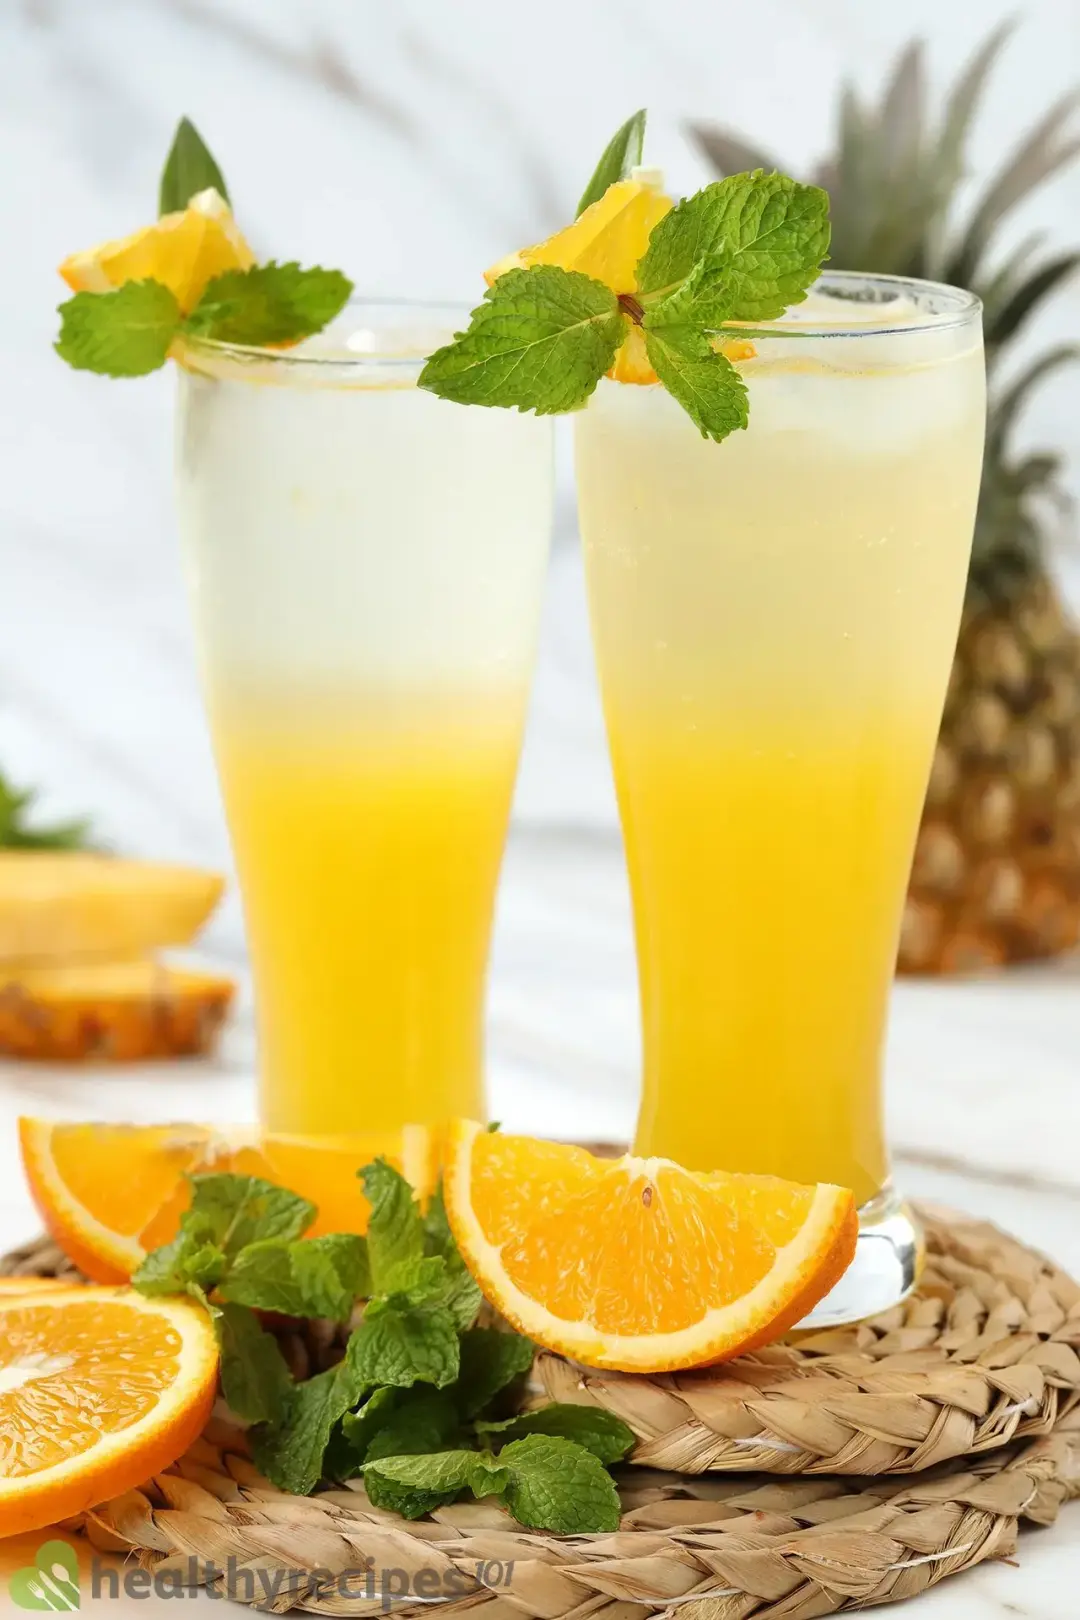 Two glasses of unstirred rum and orange juice soda, put next to garnishes: orange wedges, mint sprigs, and twined coasters